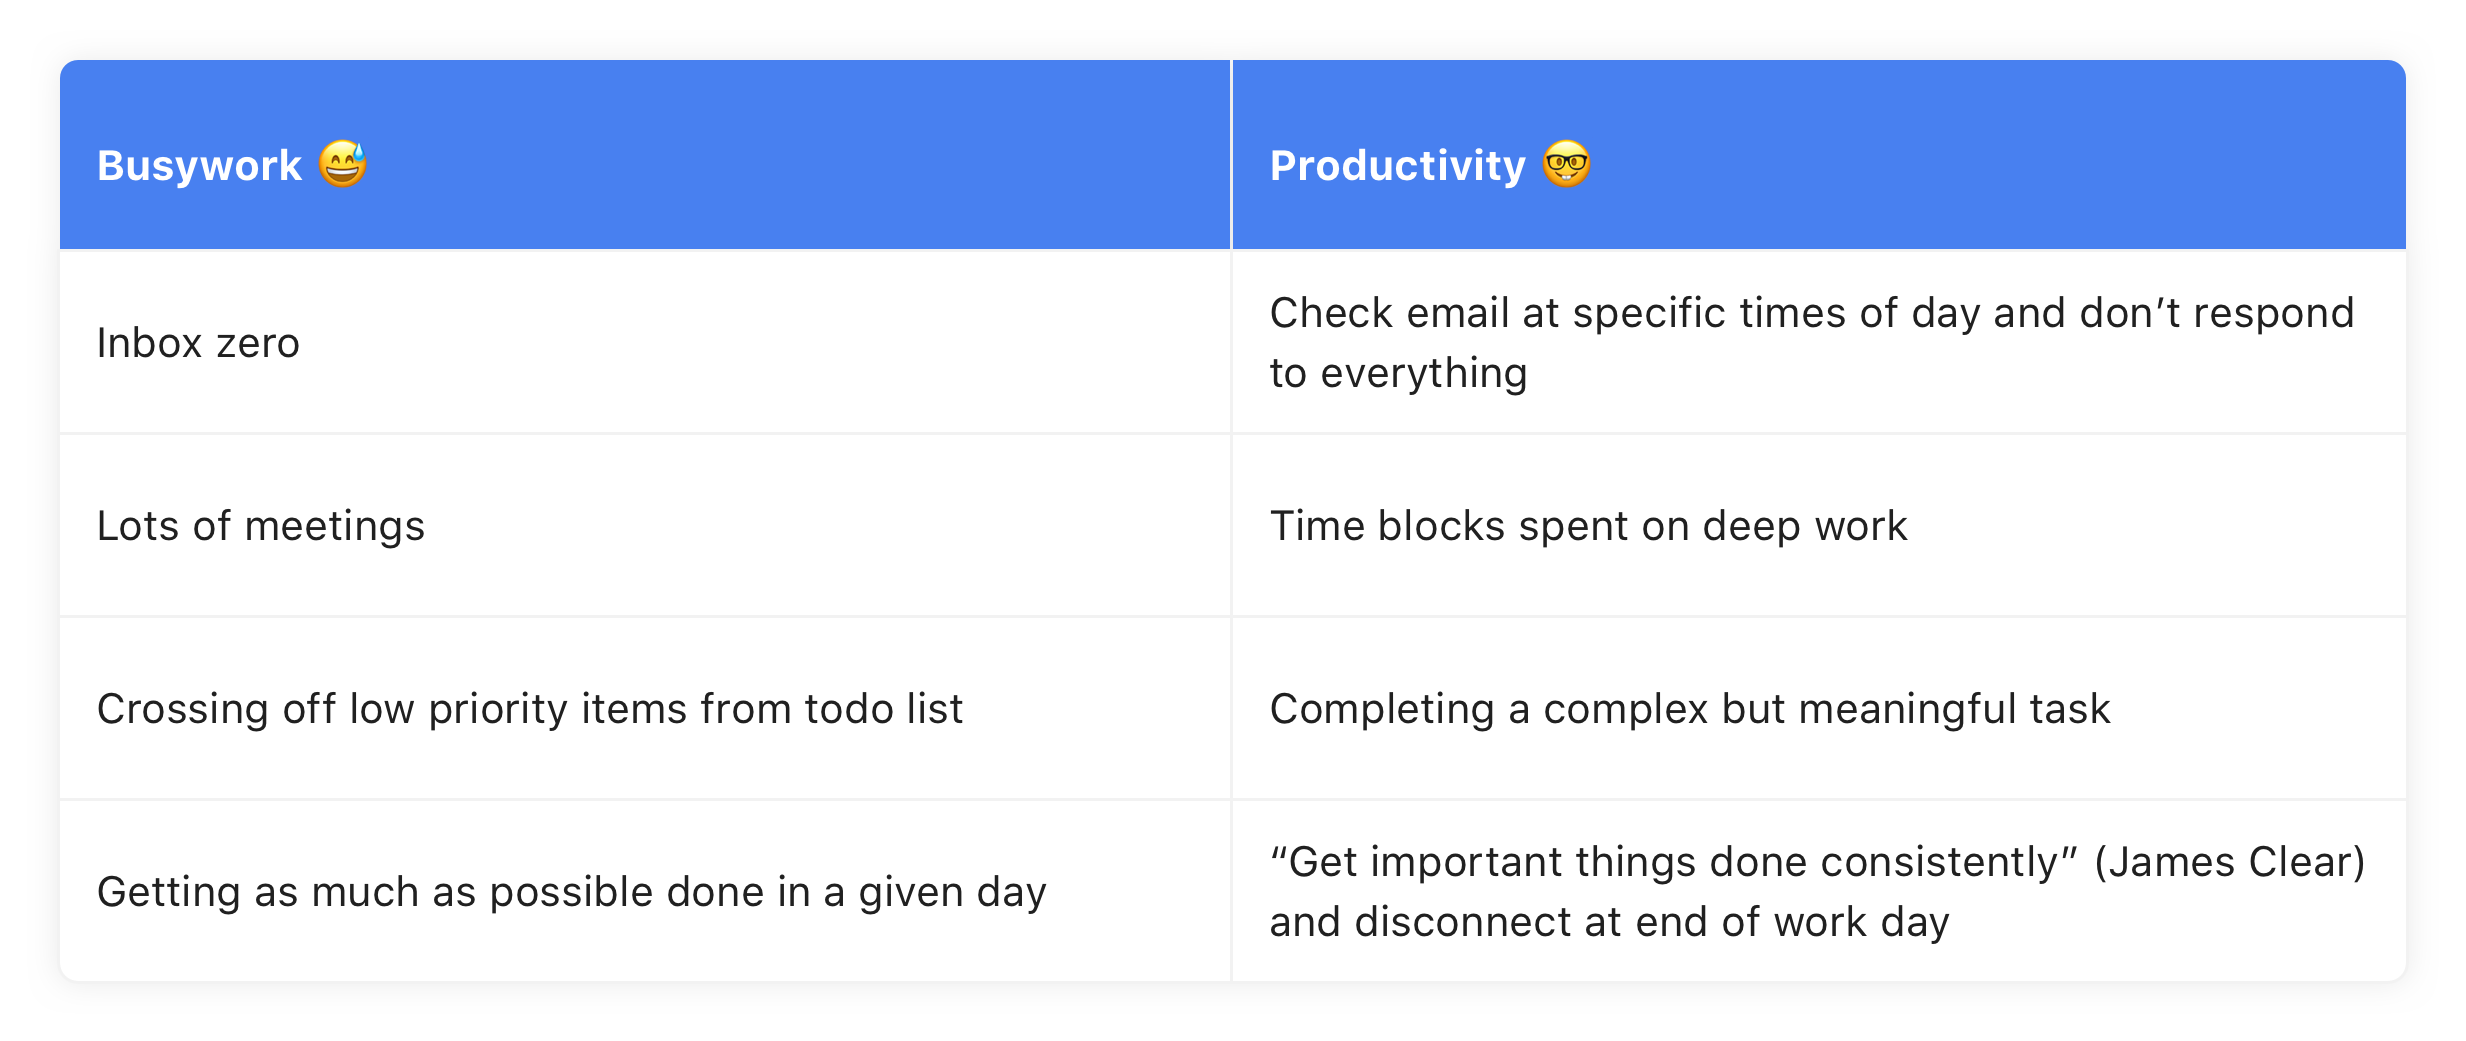 productivity shame busywork versus productivity table